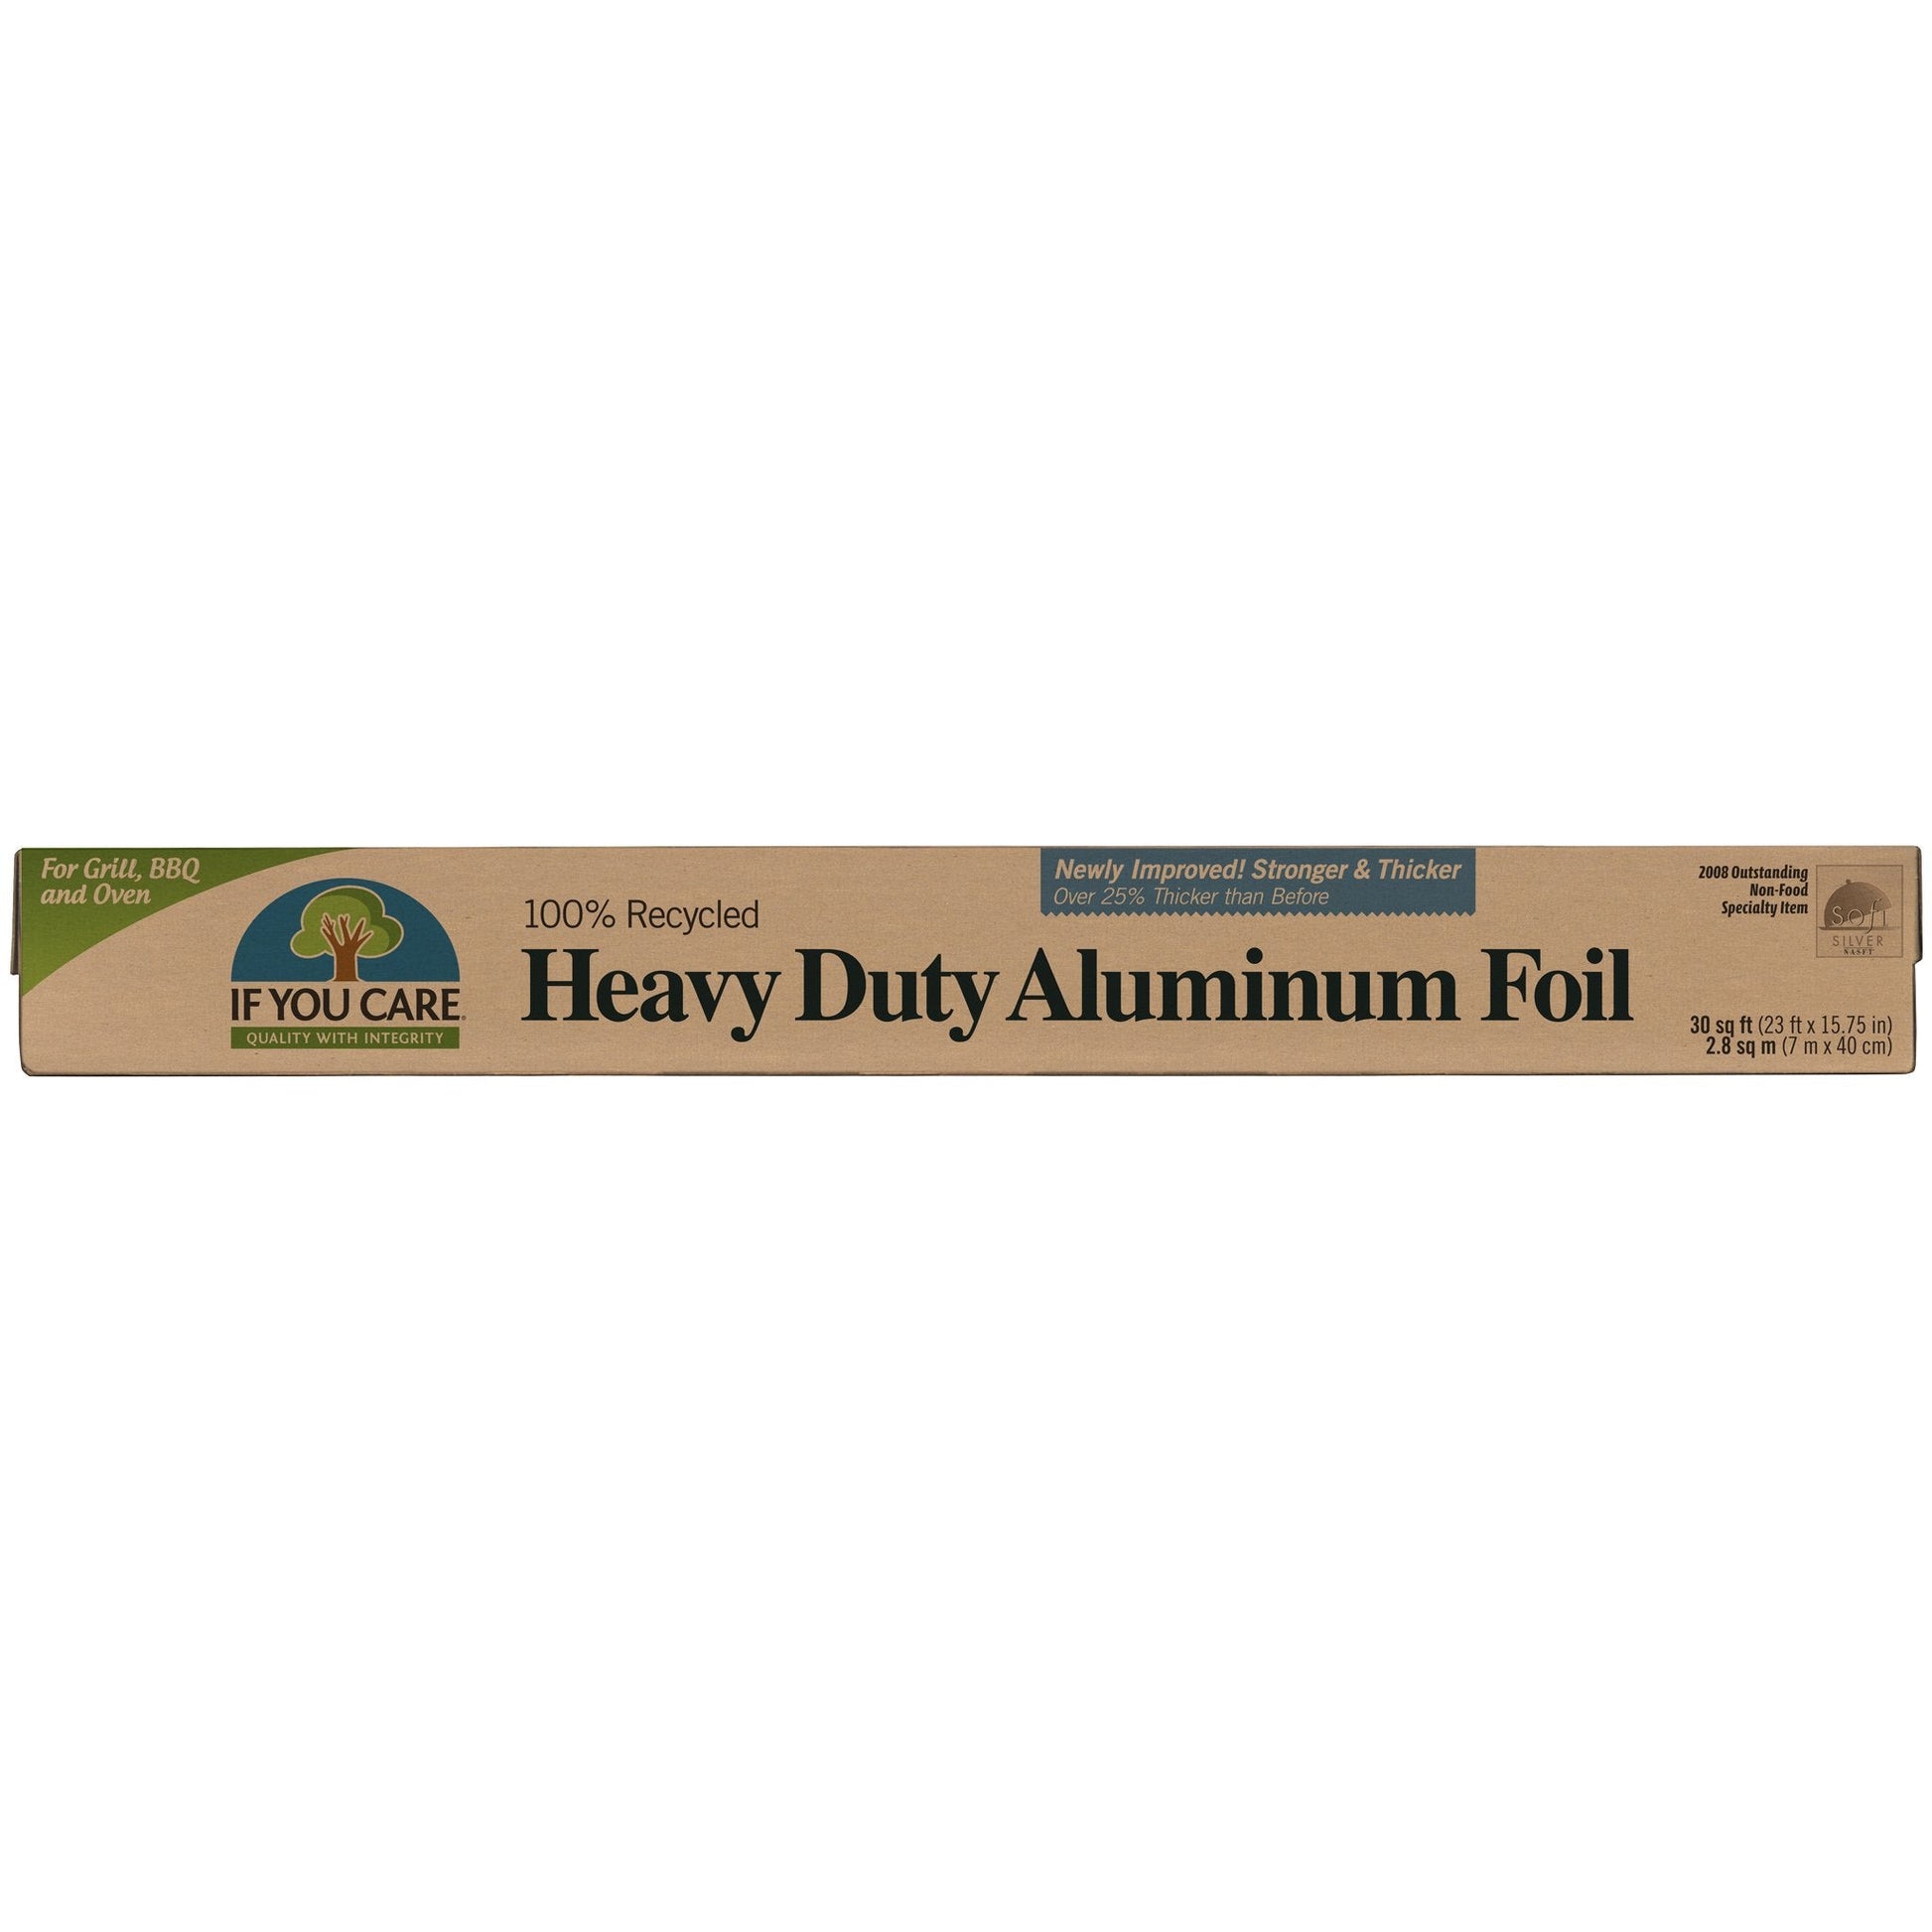 If You Care Heavy Duty Recycled Foil 2.8 sqm box - Just Natural